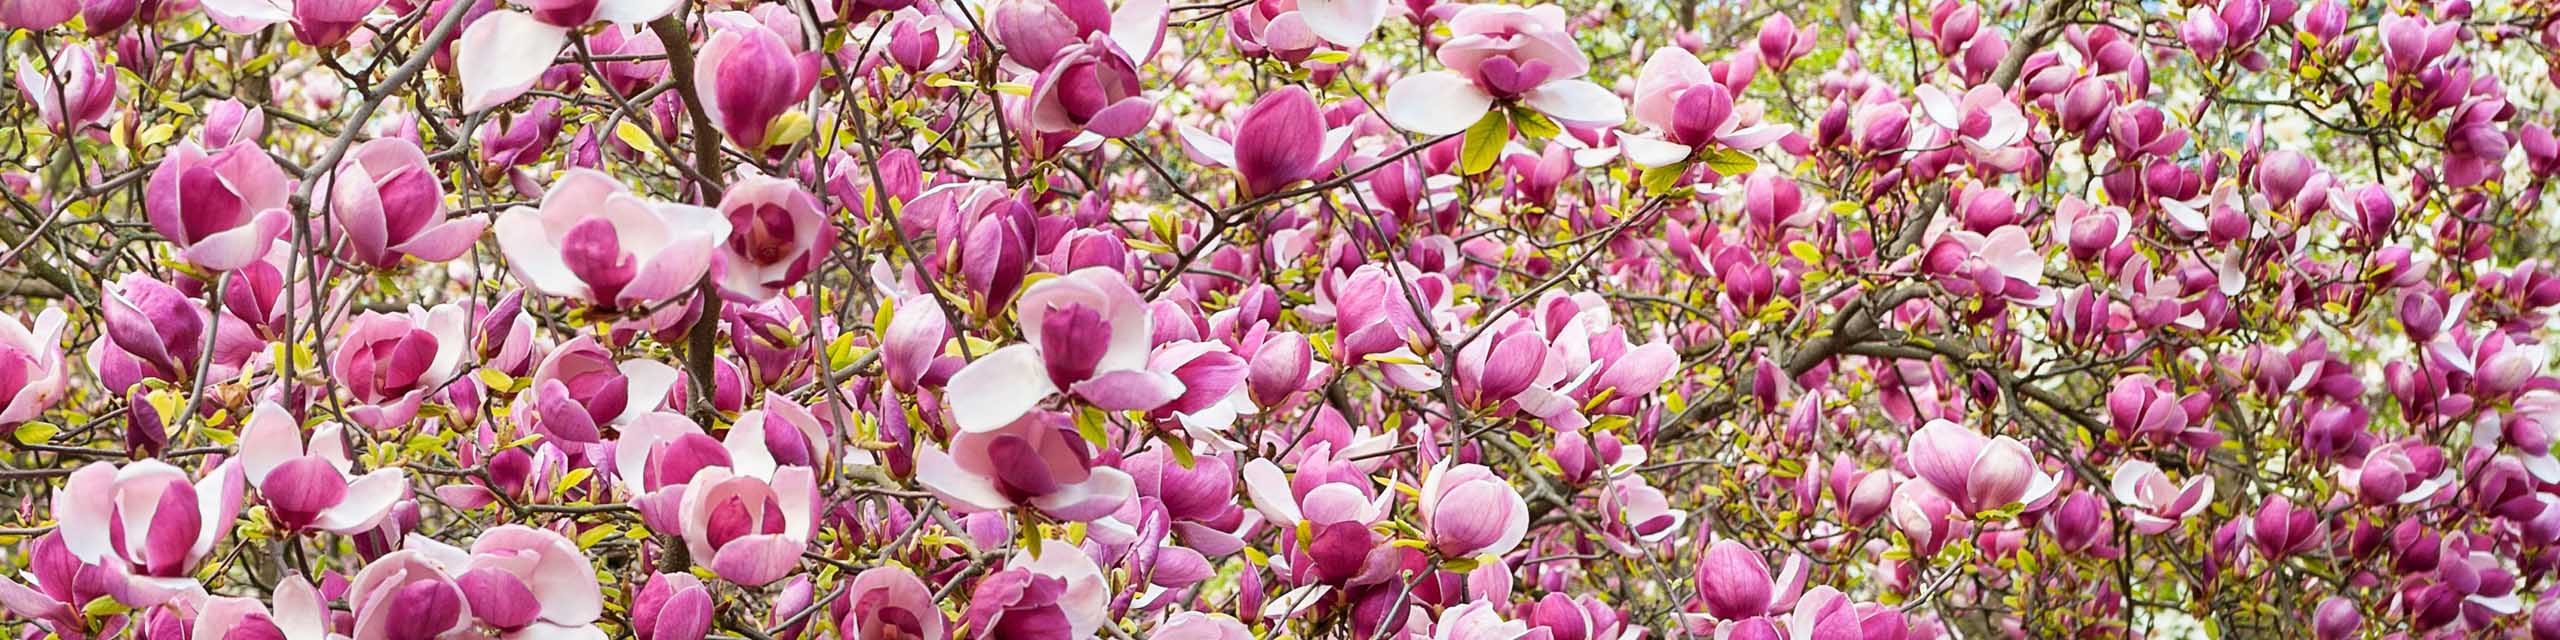 Magnolia tree blooming with pink flowers in the spring.